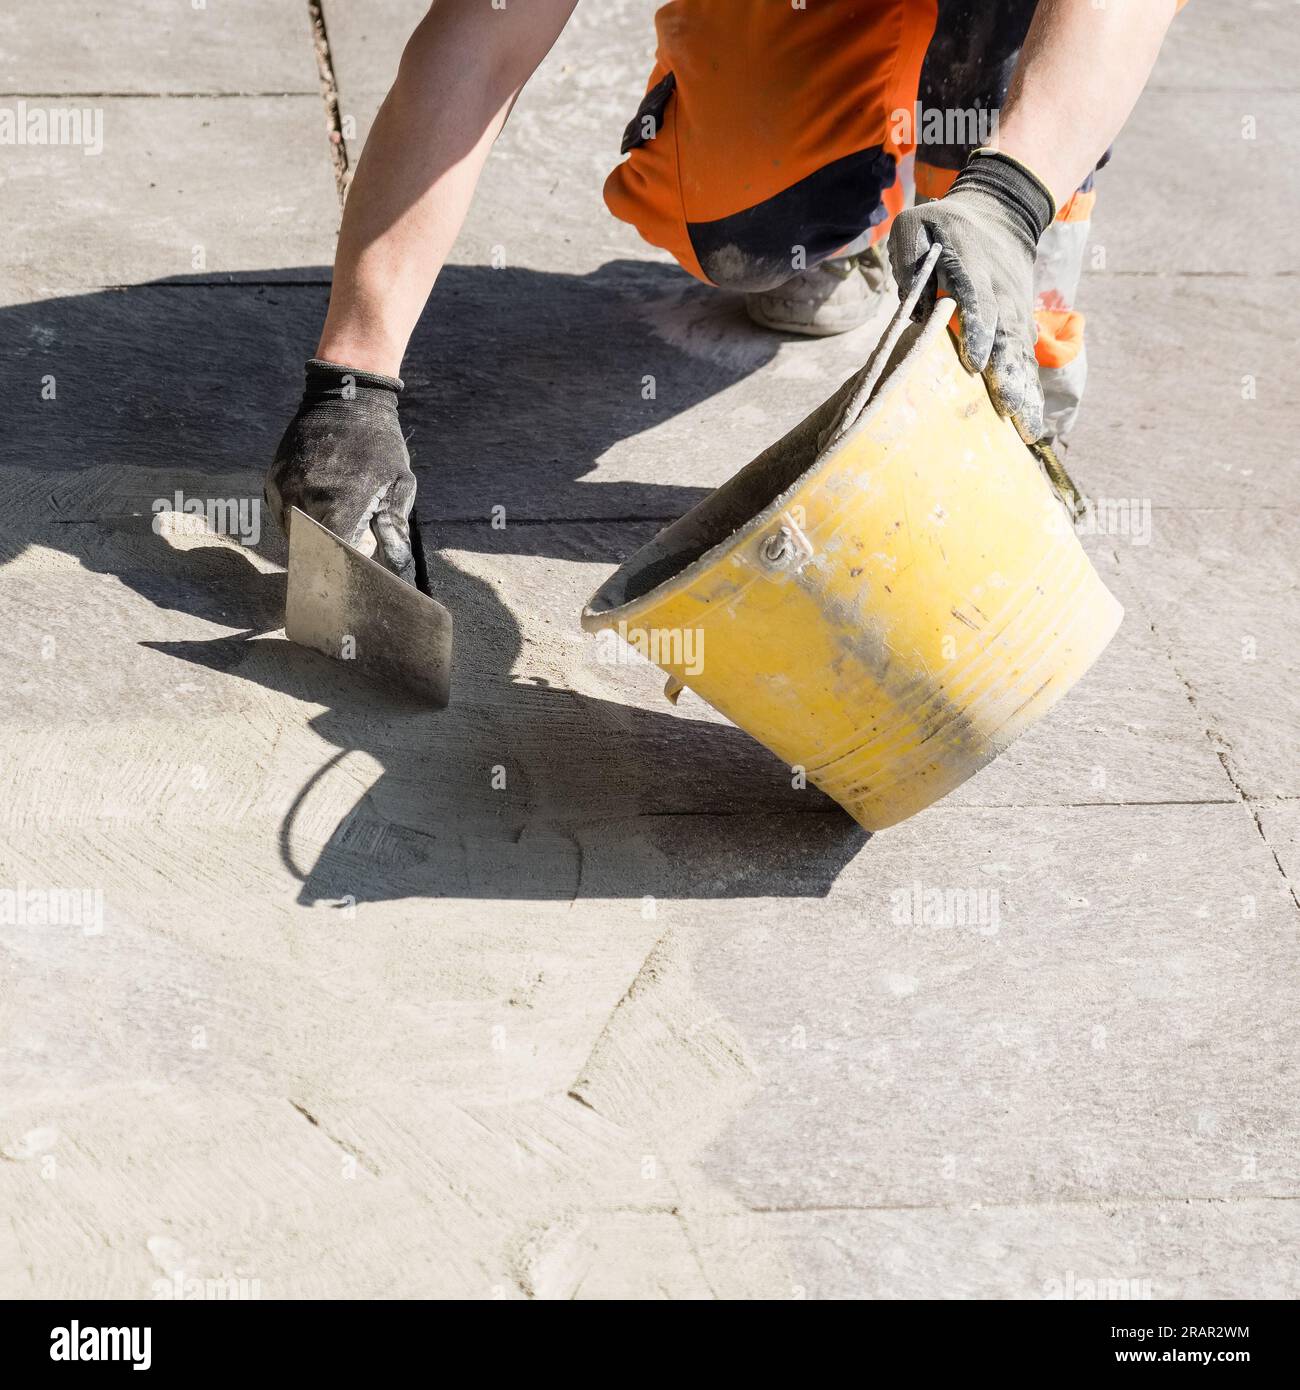 Real life scene, worker with trowel and bucket working on a pedestrian pavement. Stock Photo